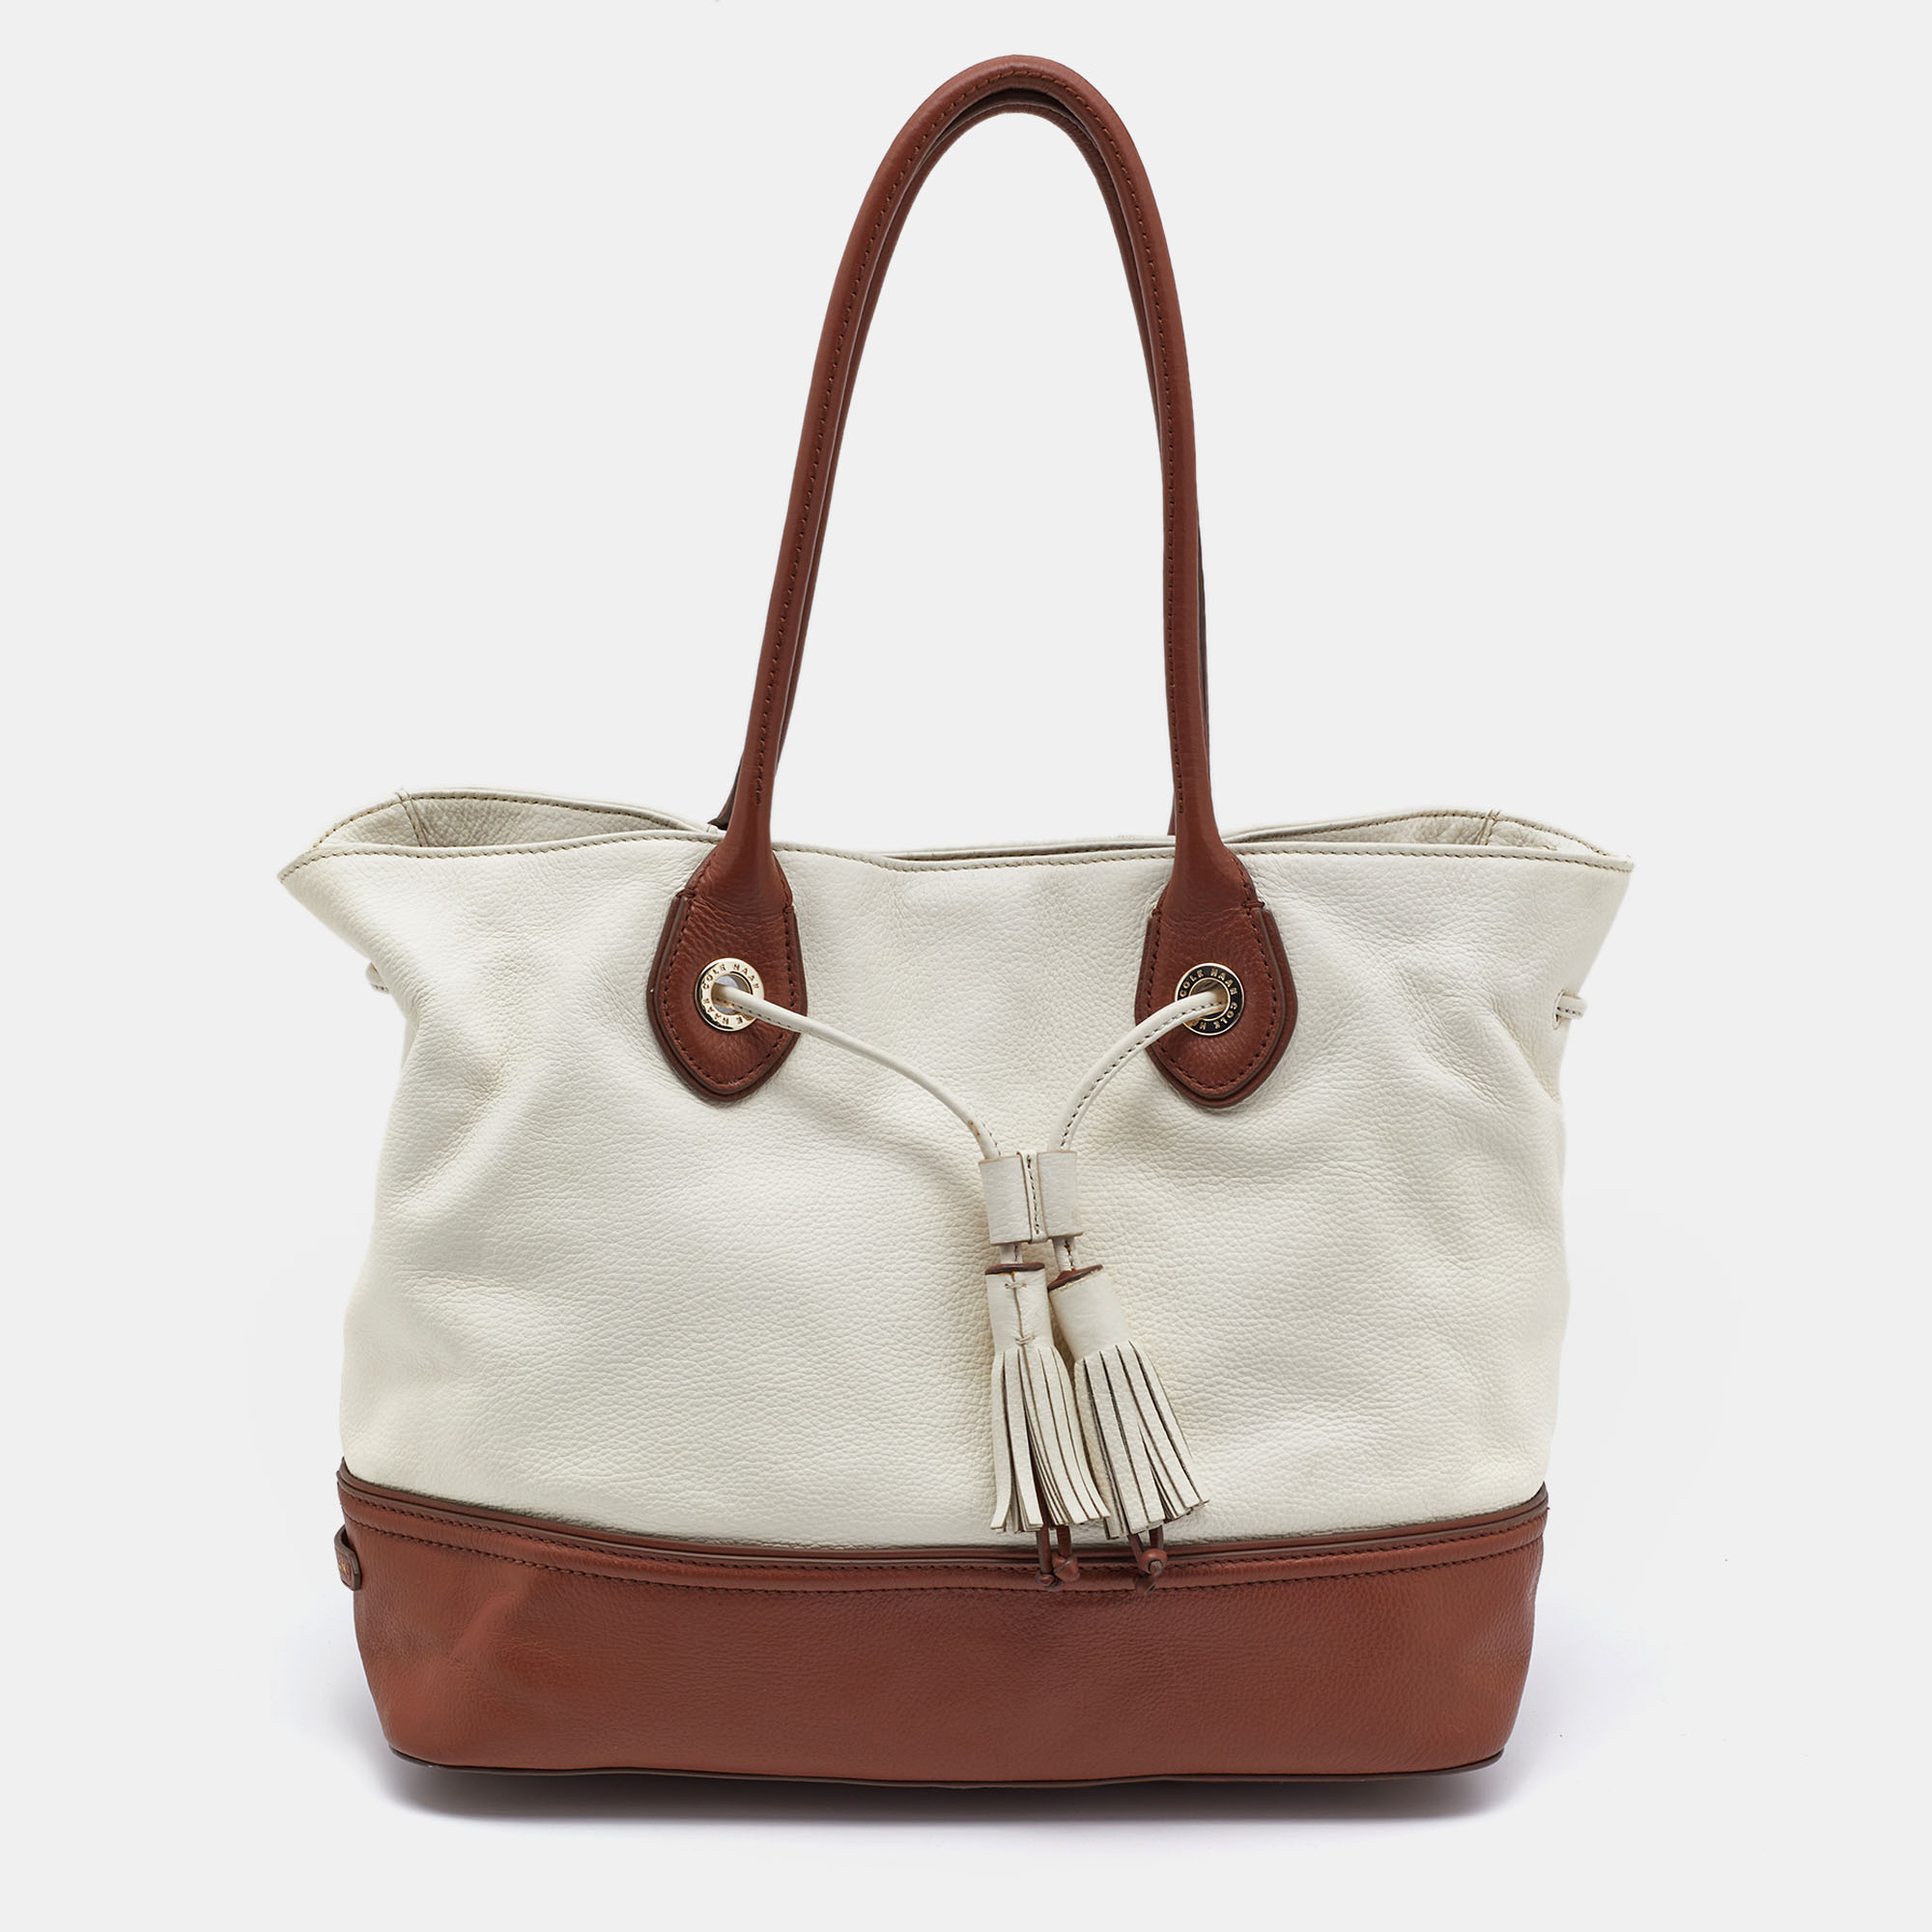 Cole Haan White/Brown Leather Reiley Tassel Tote